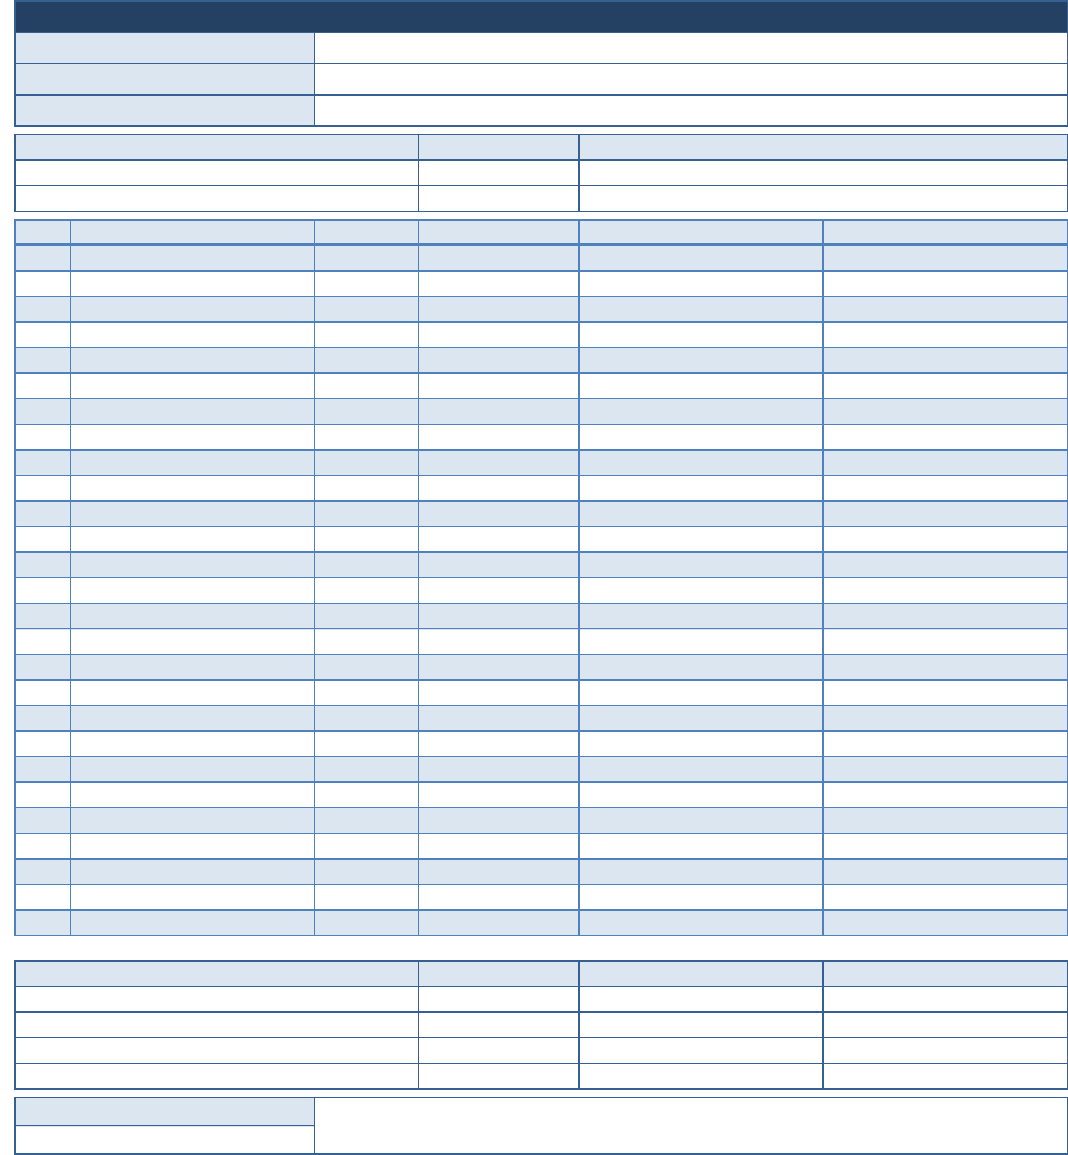 Baseball Roster and Lineup Template